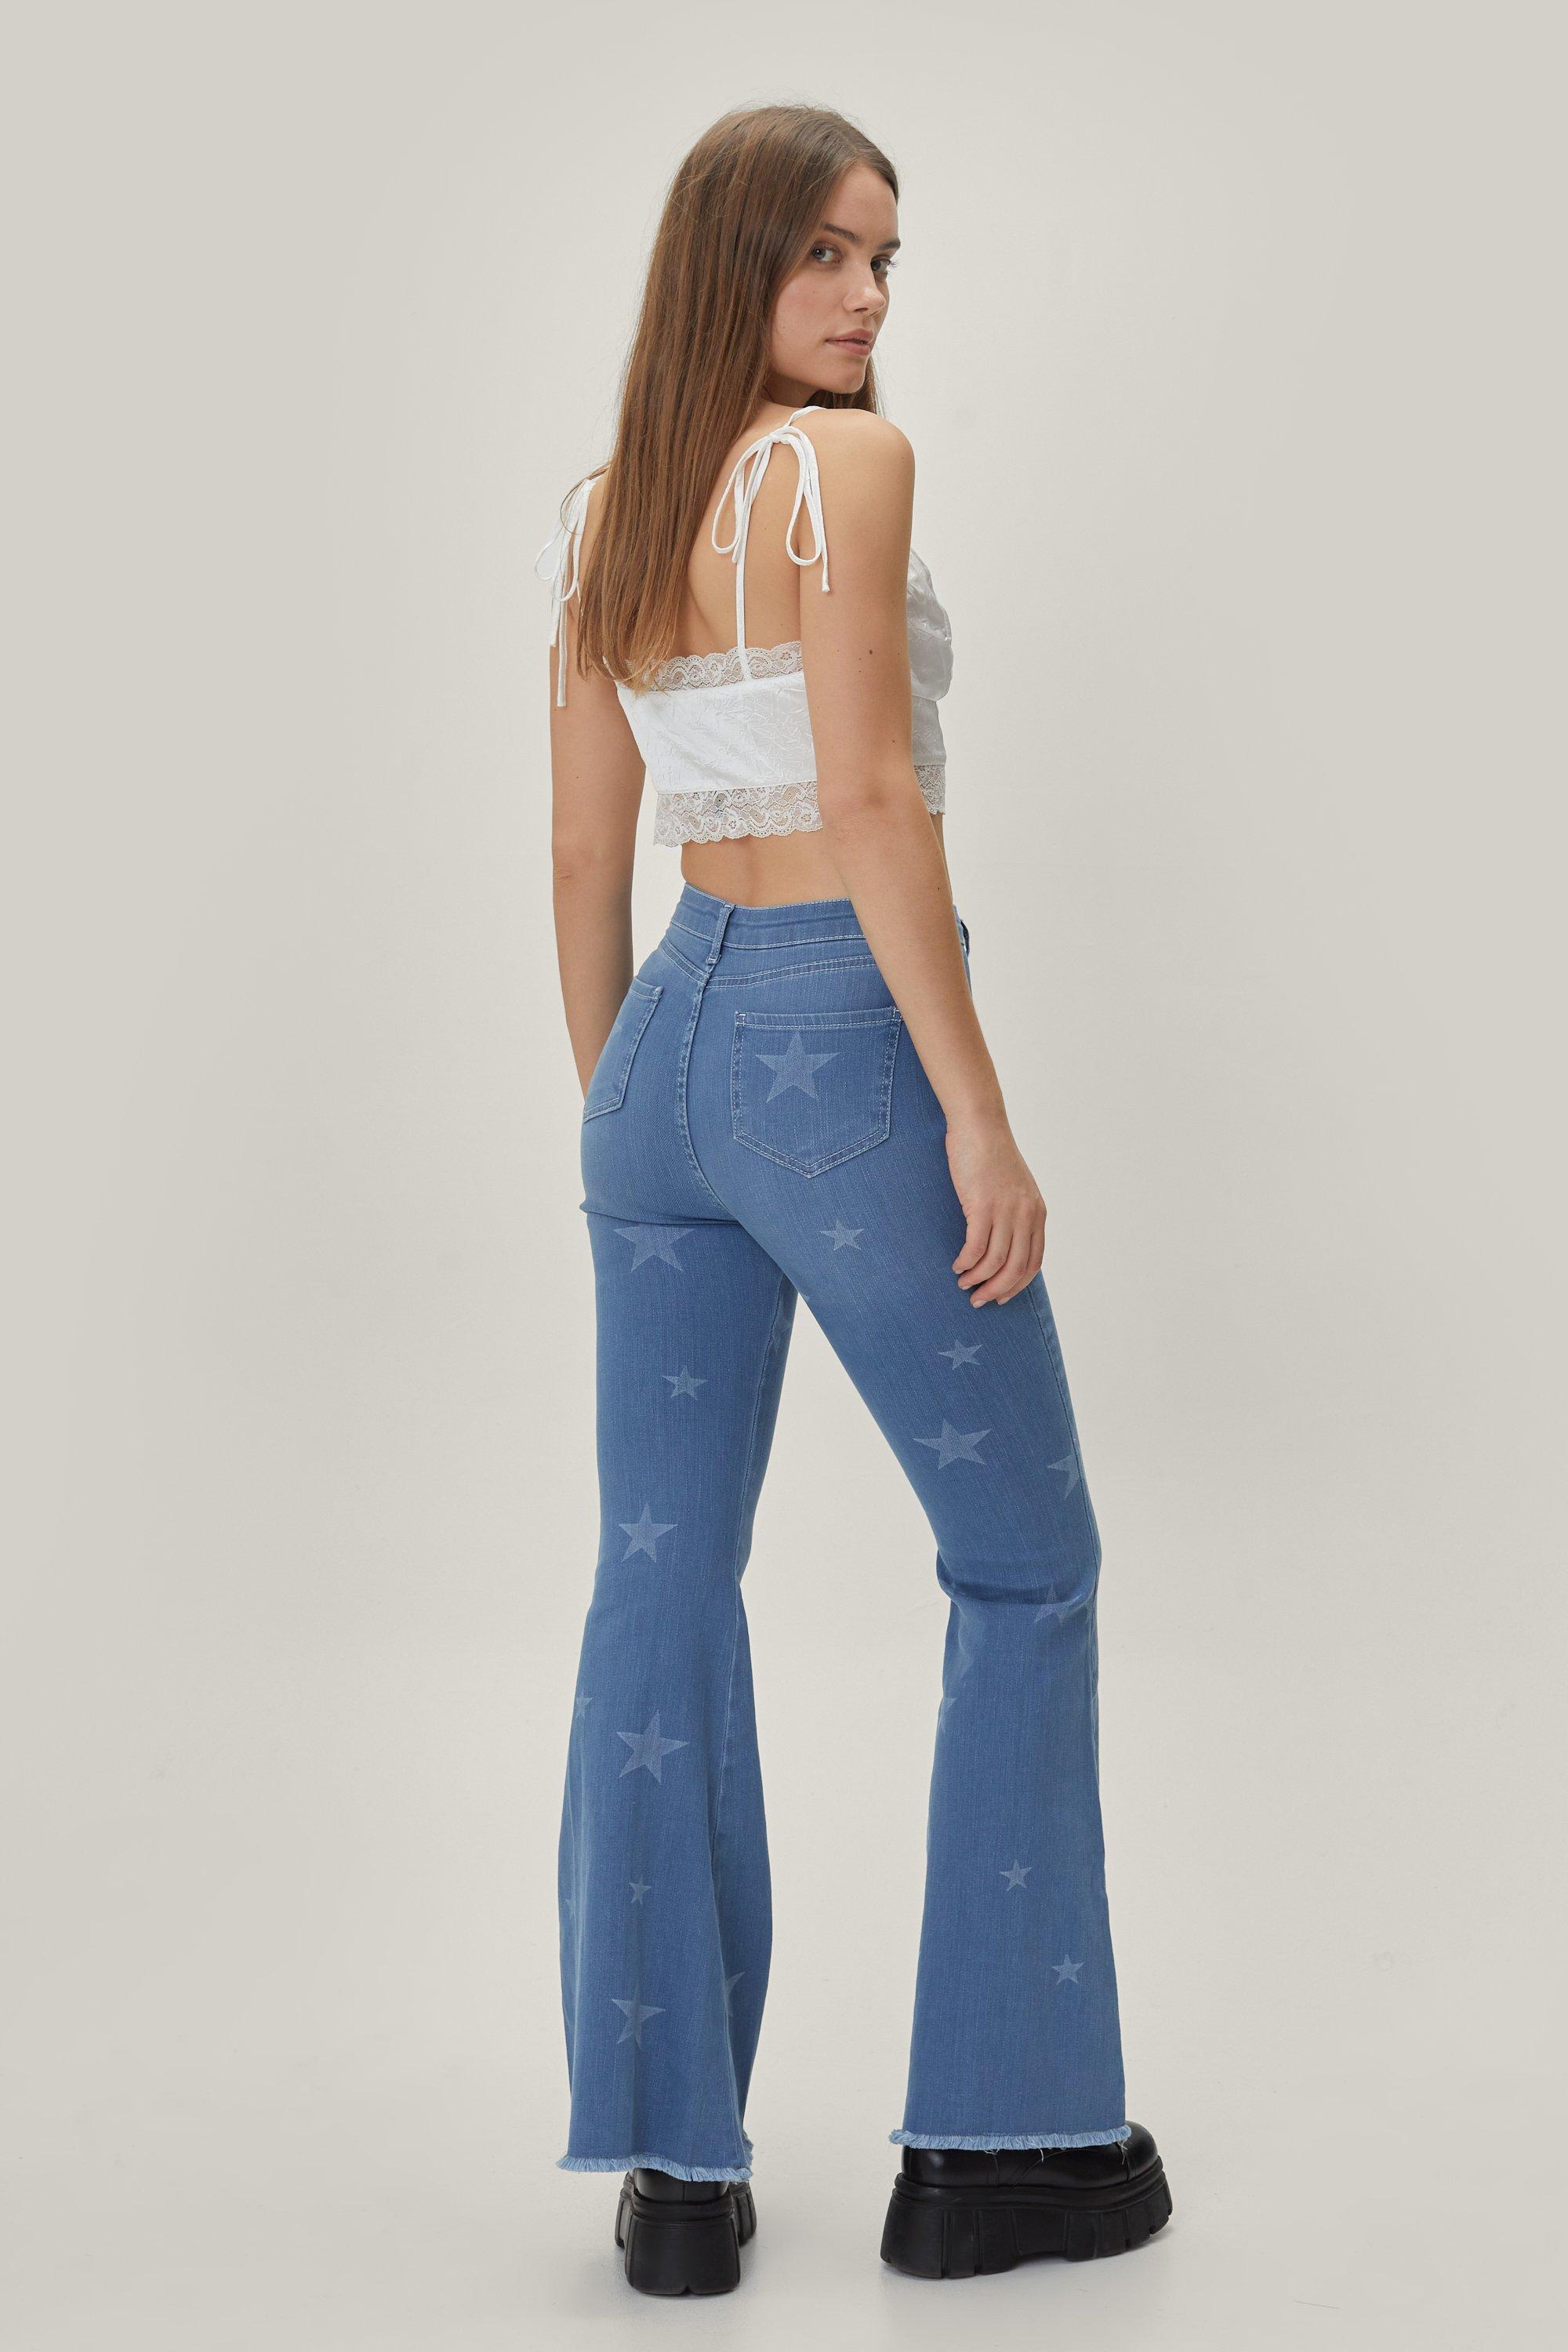 star flare jeans